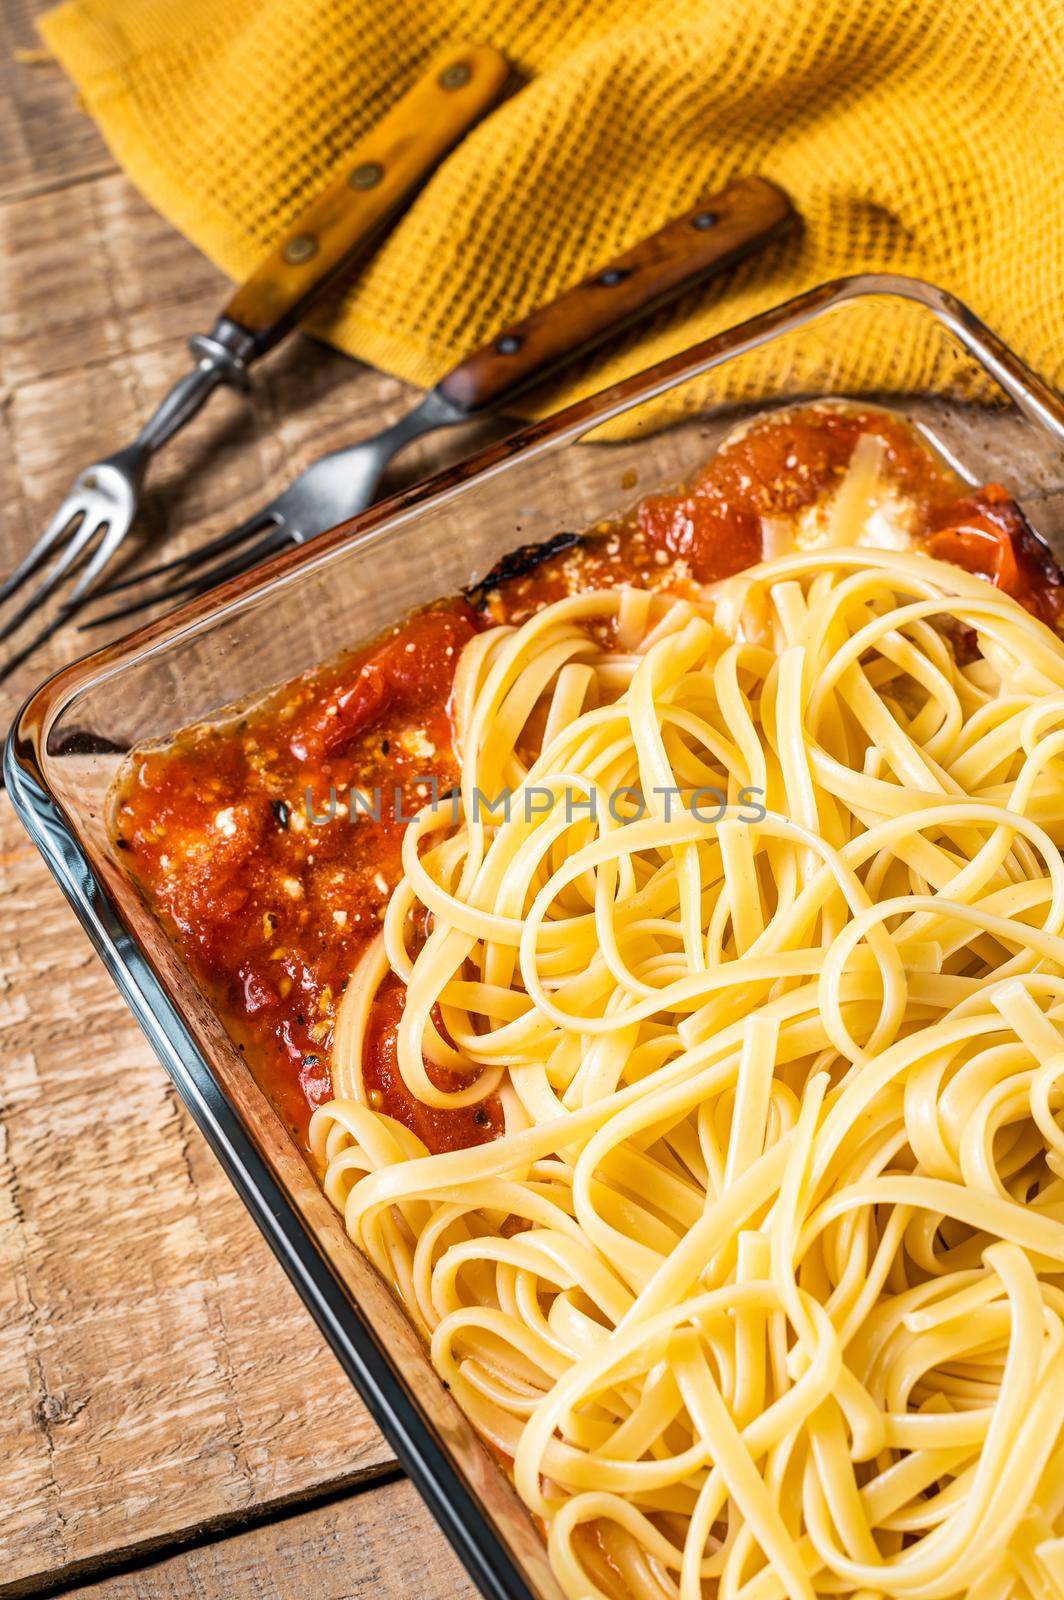 Oven roasted feta pasta with tomatoes in baking dish. Wooden background. Top view.